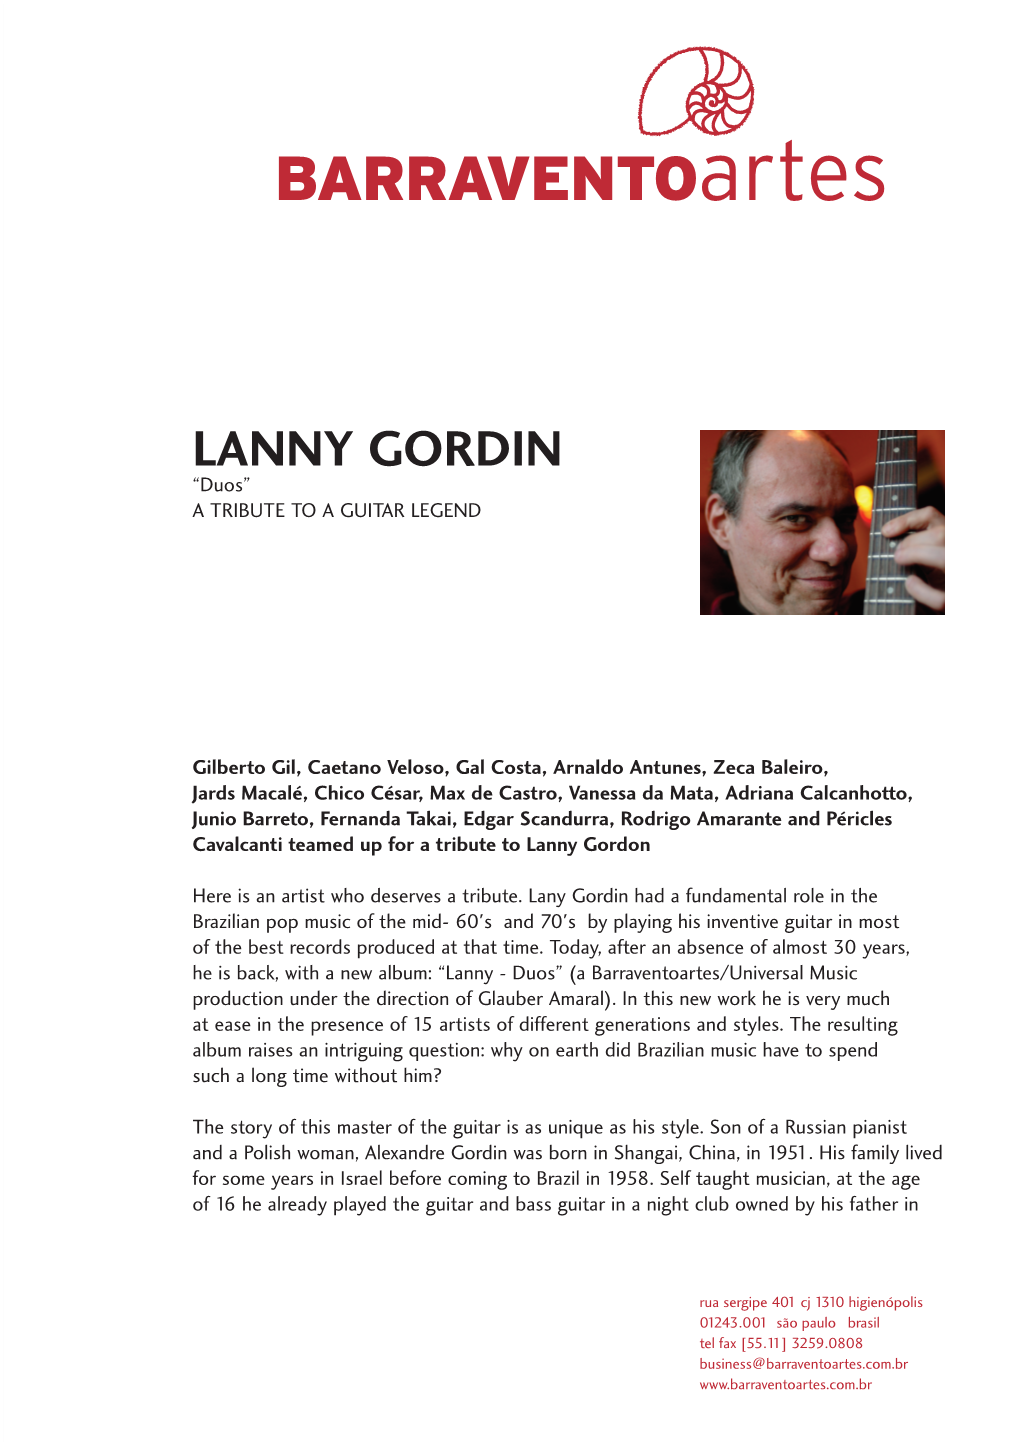 LANNY GORDIN “Duos” a TRIBUTE to a GUITAR LEGEND